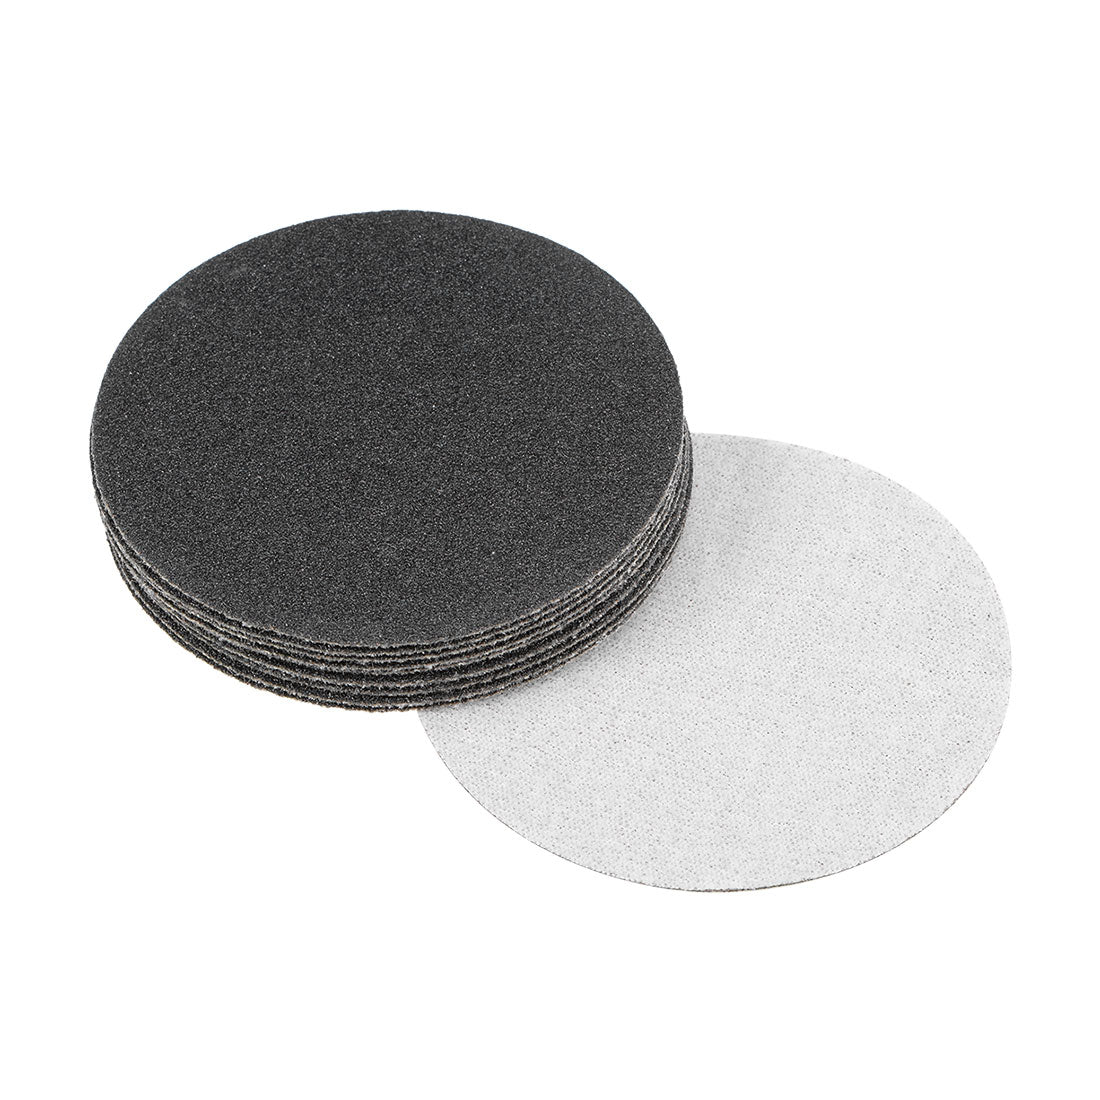 Uxcell Uxcell 3 inch Wet Dry Disc 320 Grit Hook and Loop Sanding Disc Silicon Carbide 10pcs